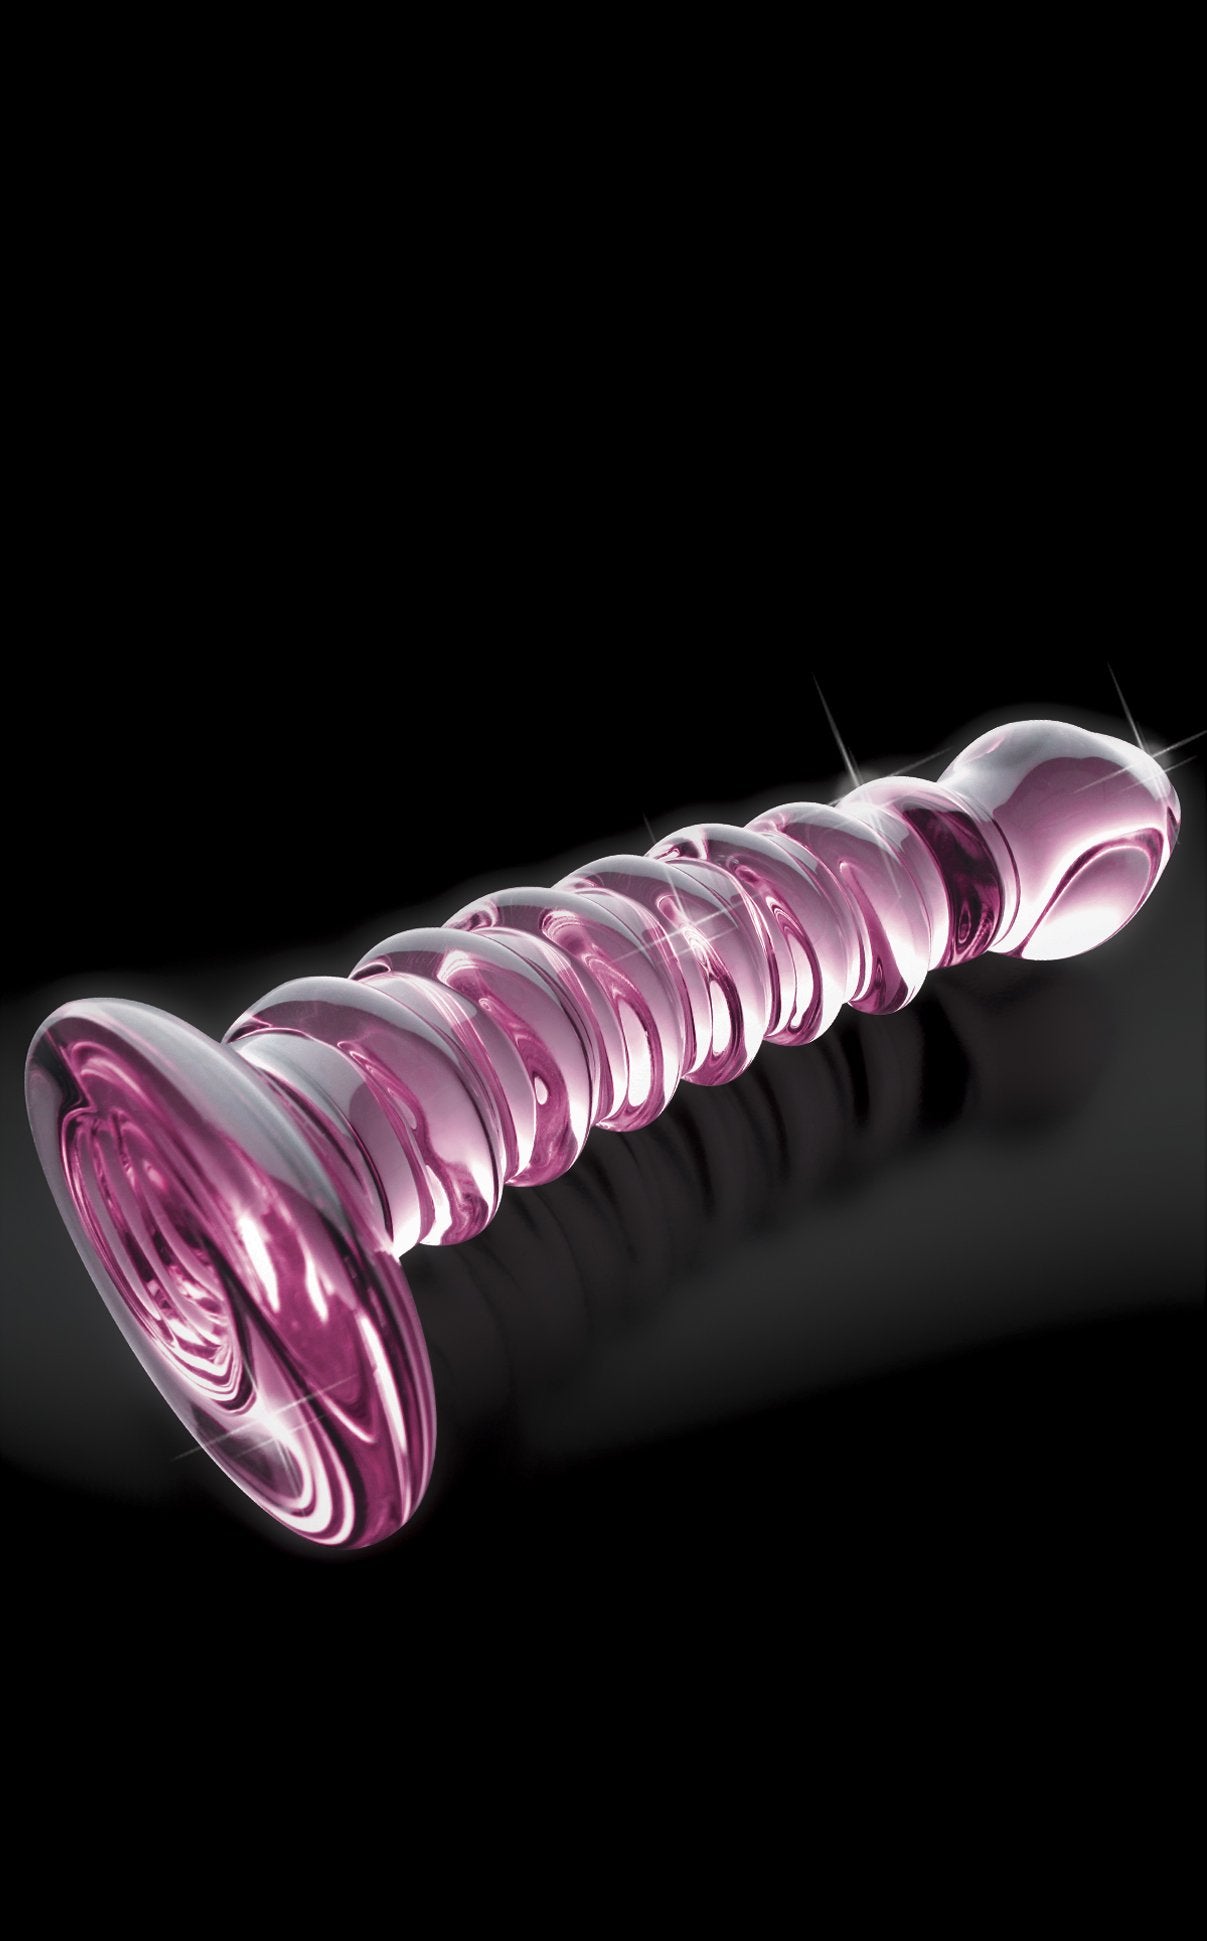 Icicles No 28 Hand Blown Dildo - Buy At Luxury Toy X - Free 3-Day Shipping